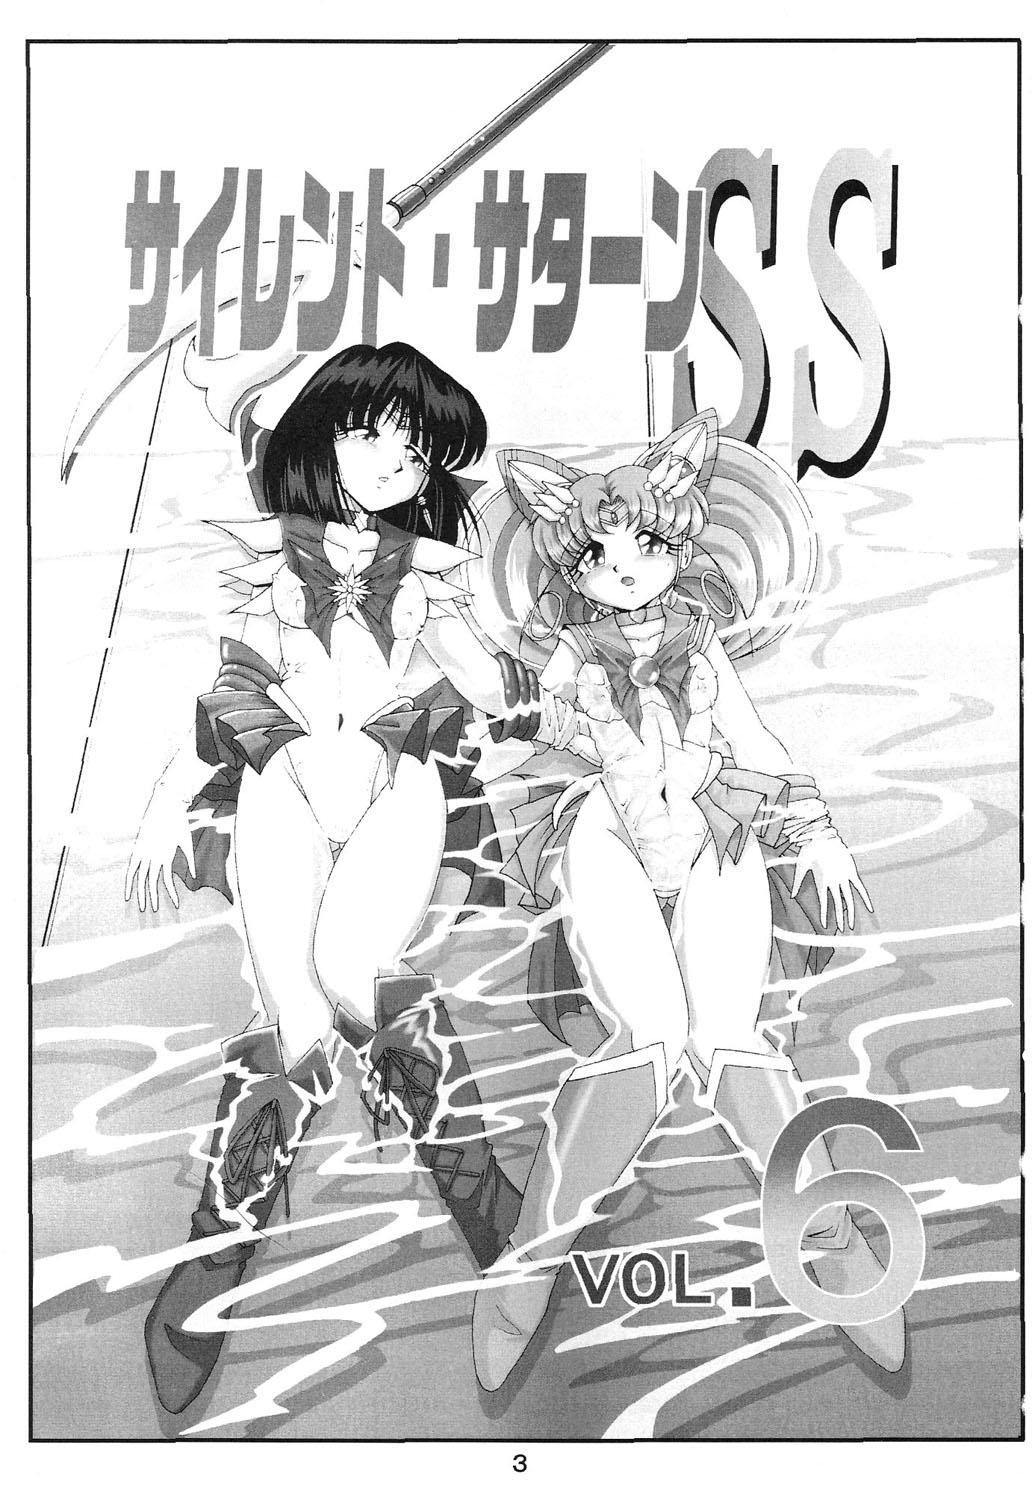 Belly Silent Saturn SS vol. 6 - Sailor moon Friend - Page 3